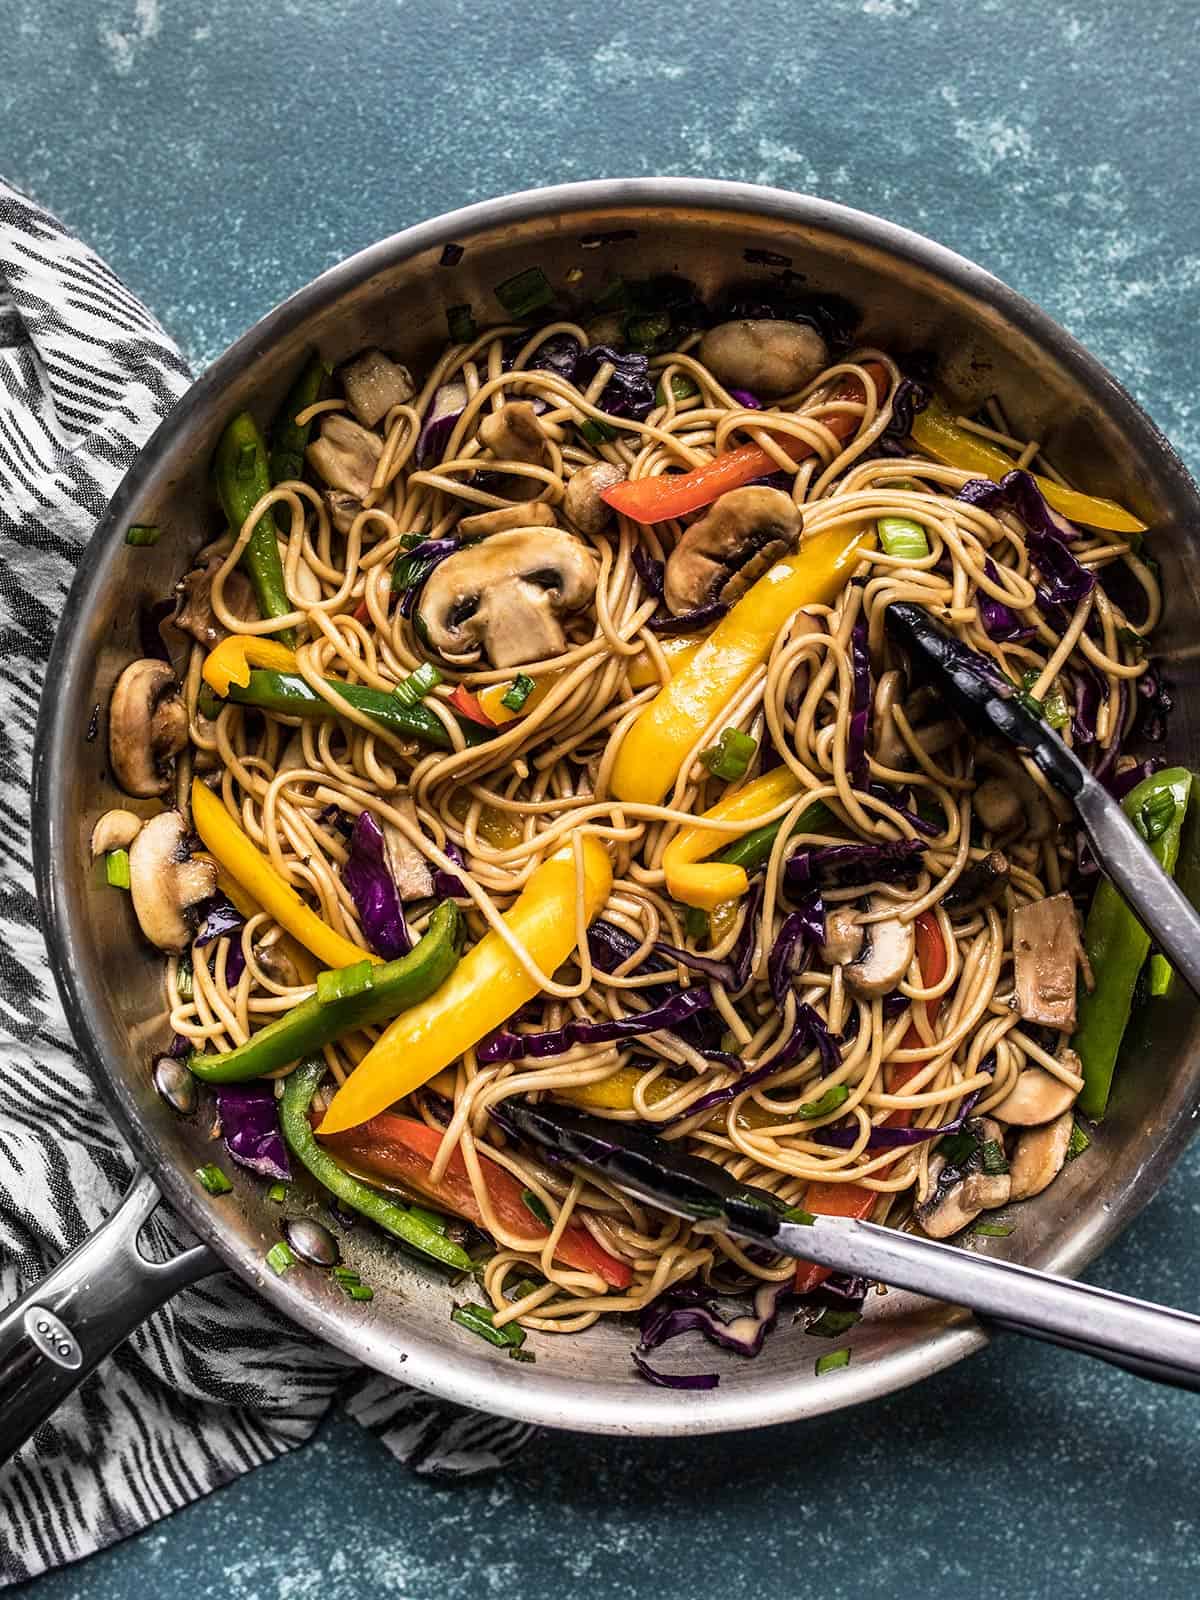 Overhead view of a skillet full of vegetable lo mein with tongs.